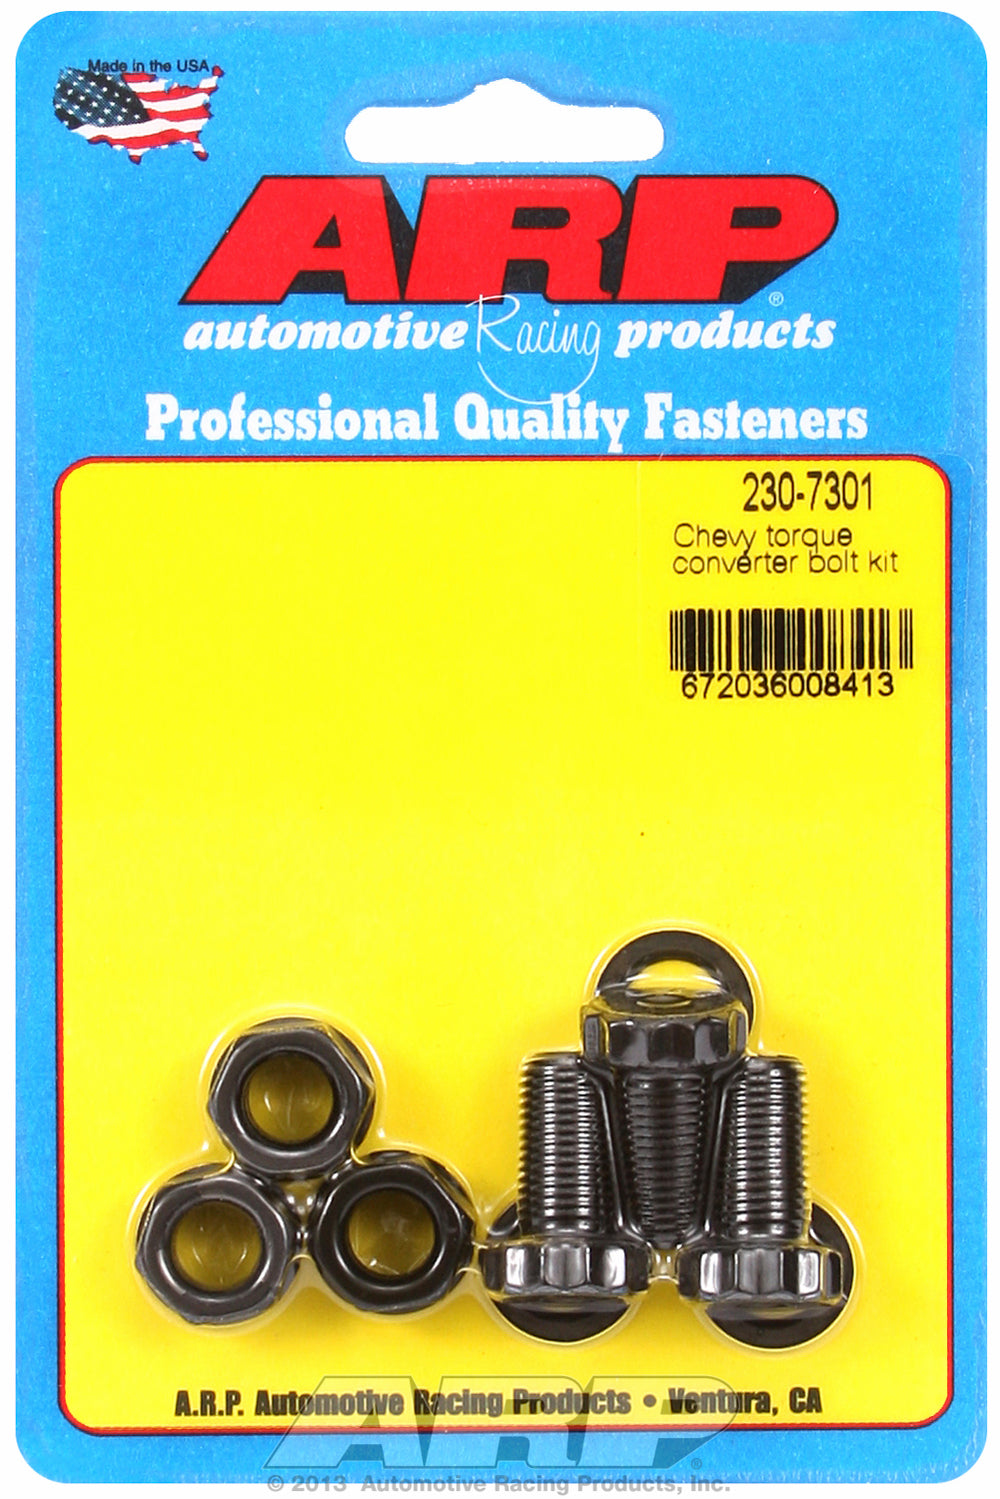 Pro Series Torque Converter Bolts for GM Powerglide, TH350 & TH400 w/ production converter